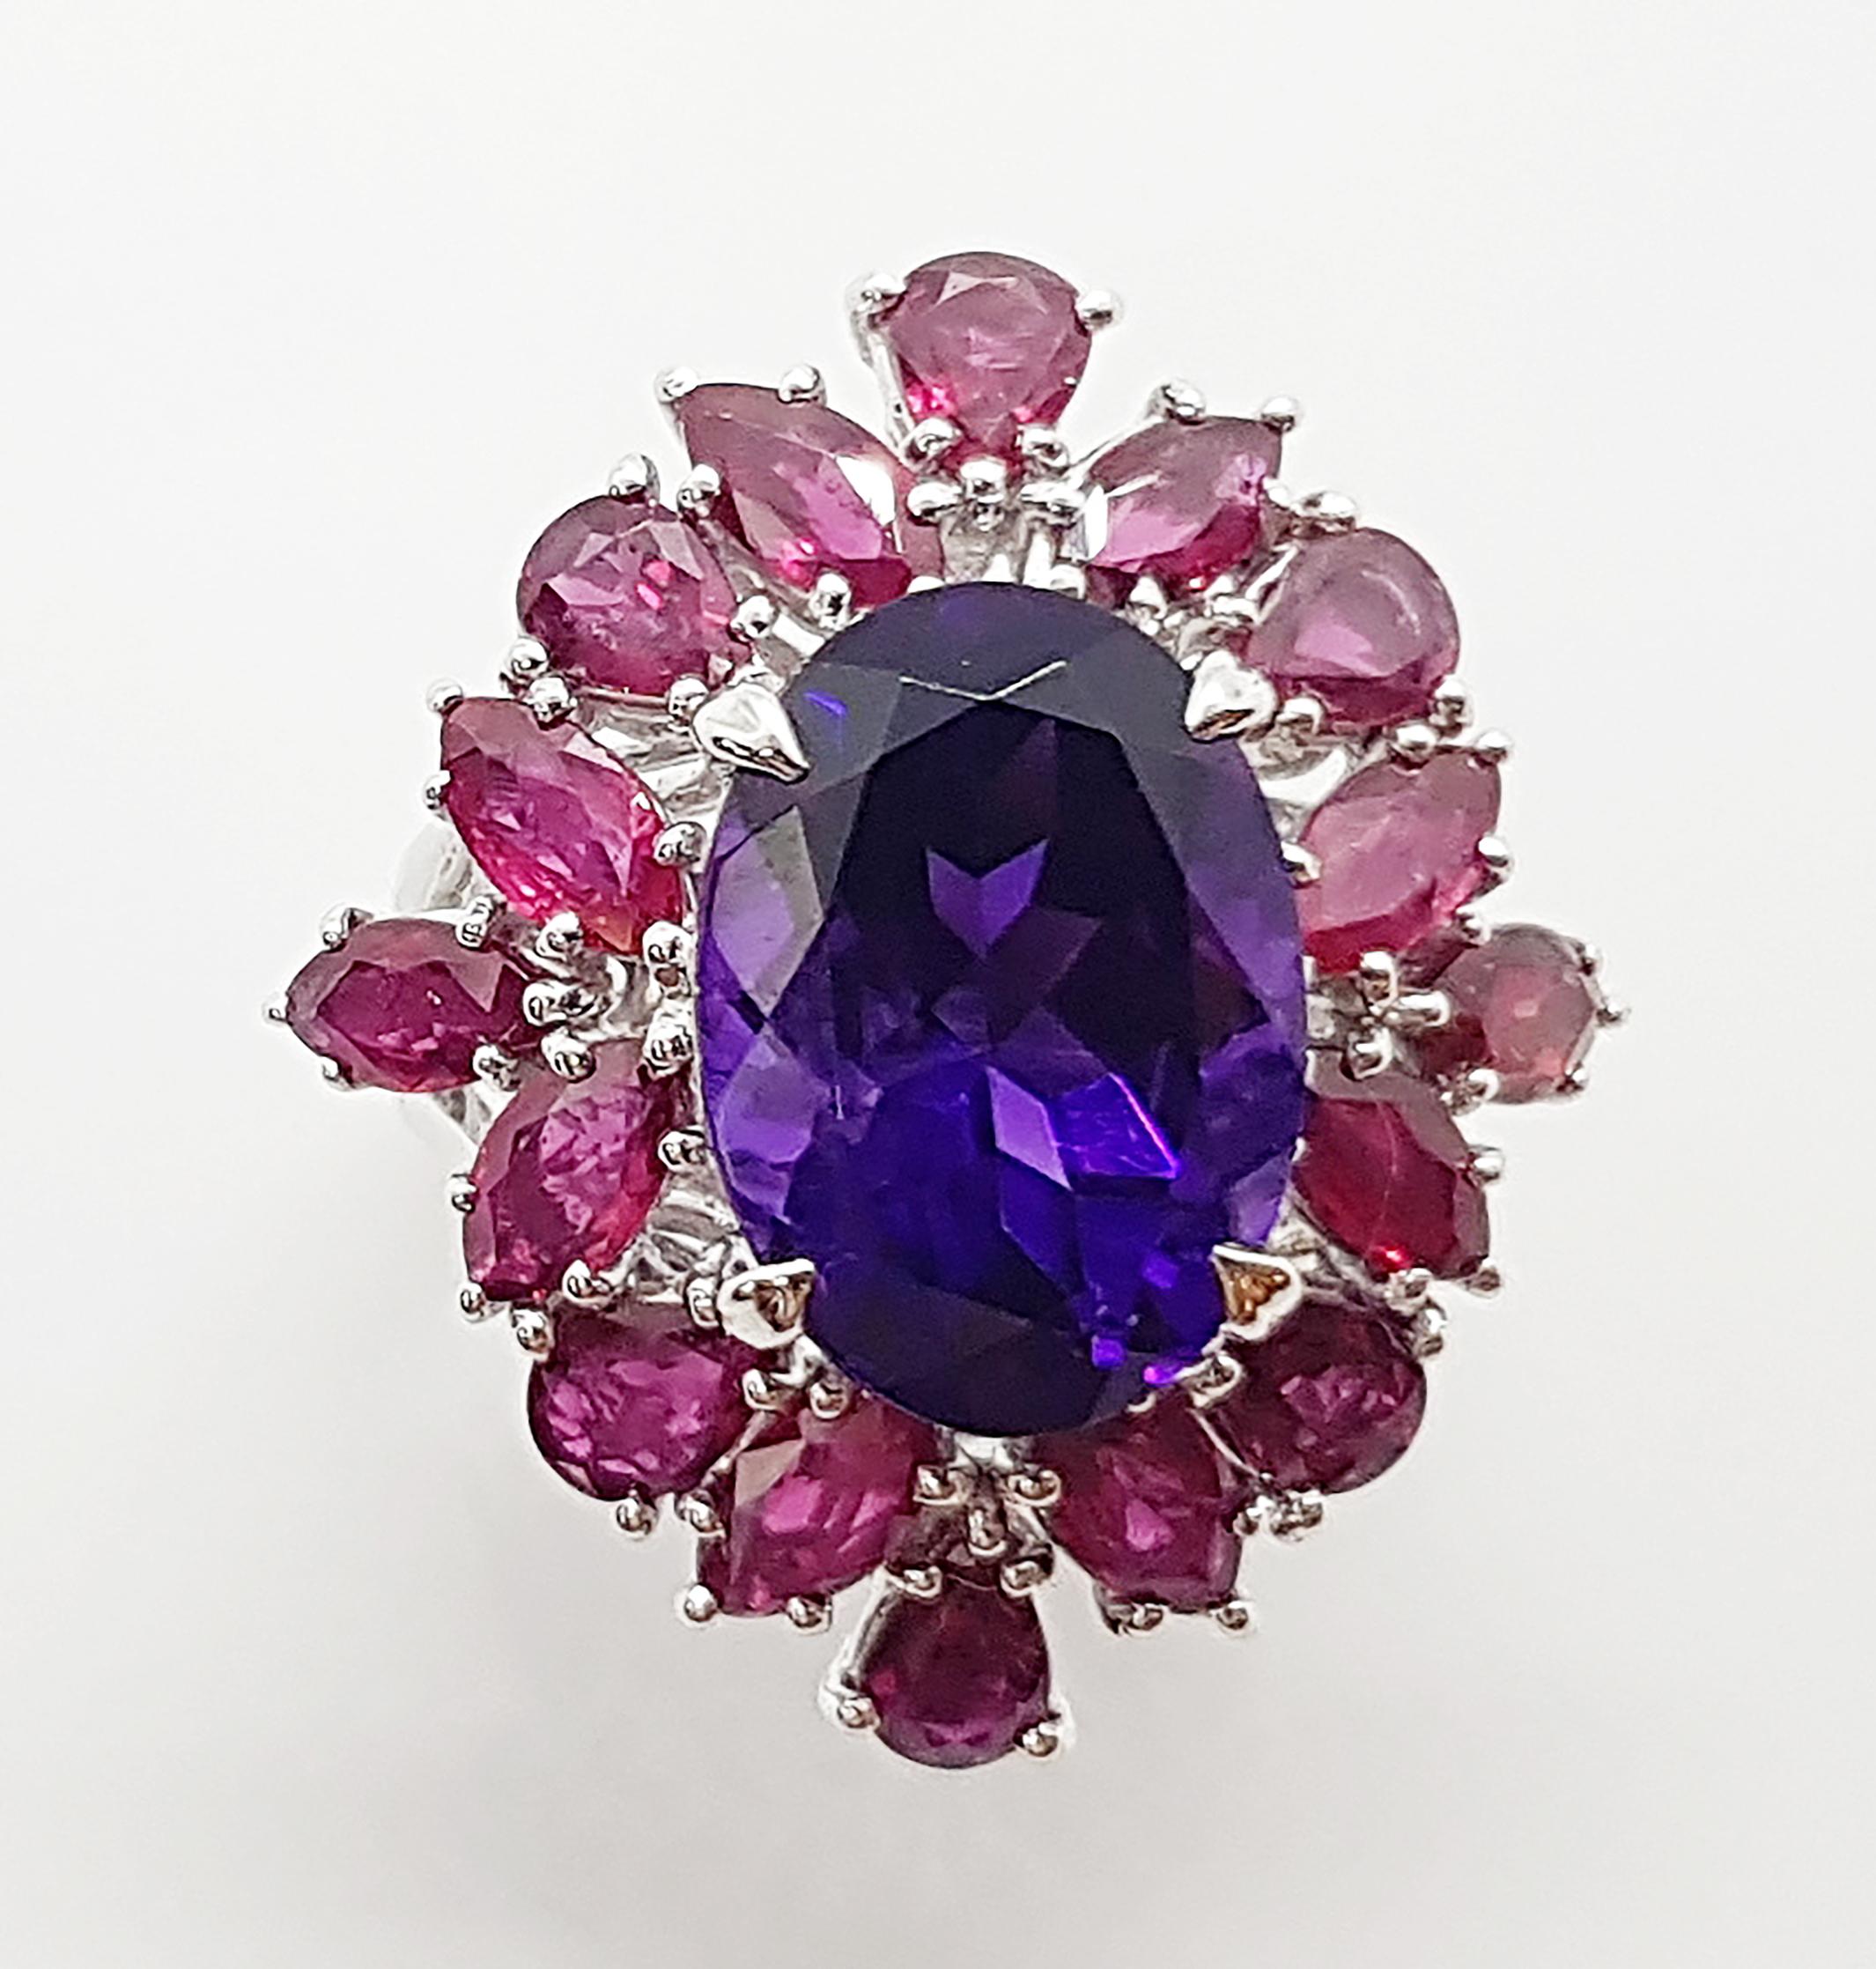 Amethyst 5.70 carats with Ruby 4.12 carats Ring set in 18 Karat White Gold Settings

Width:  2.5 cm 
Length:  2.7 cm
Ring Size: 50
Total Weight: 10.74 grams

* Amethyst*
Width:  1.0 cm 
Length:  1.5 cm



